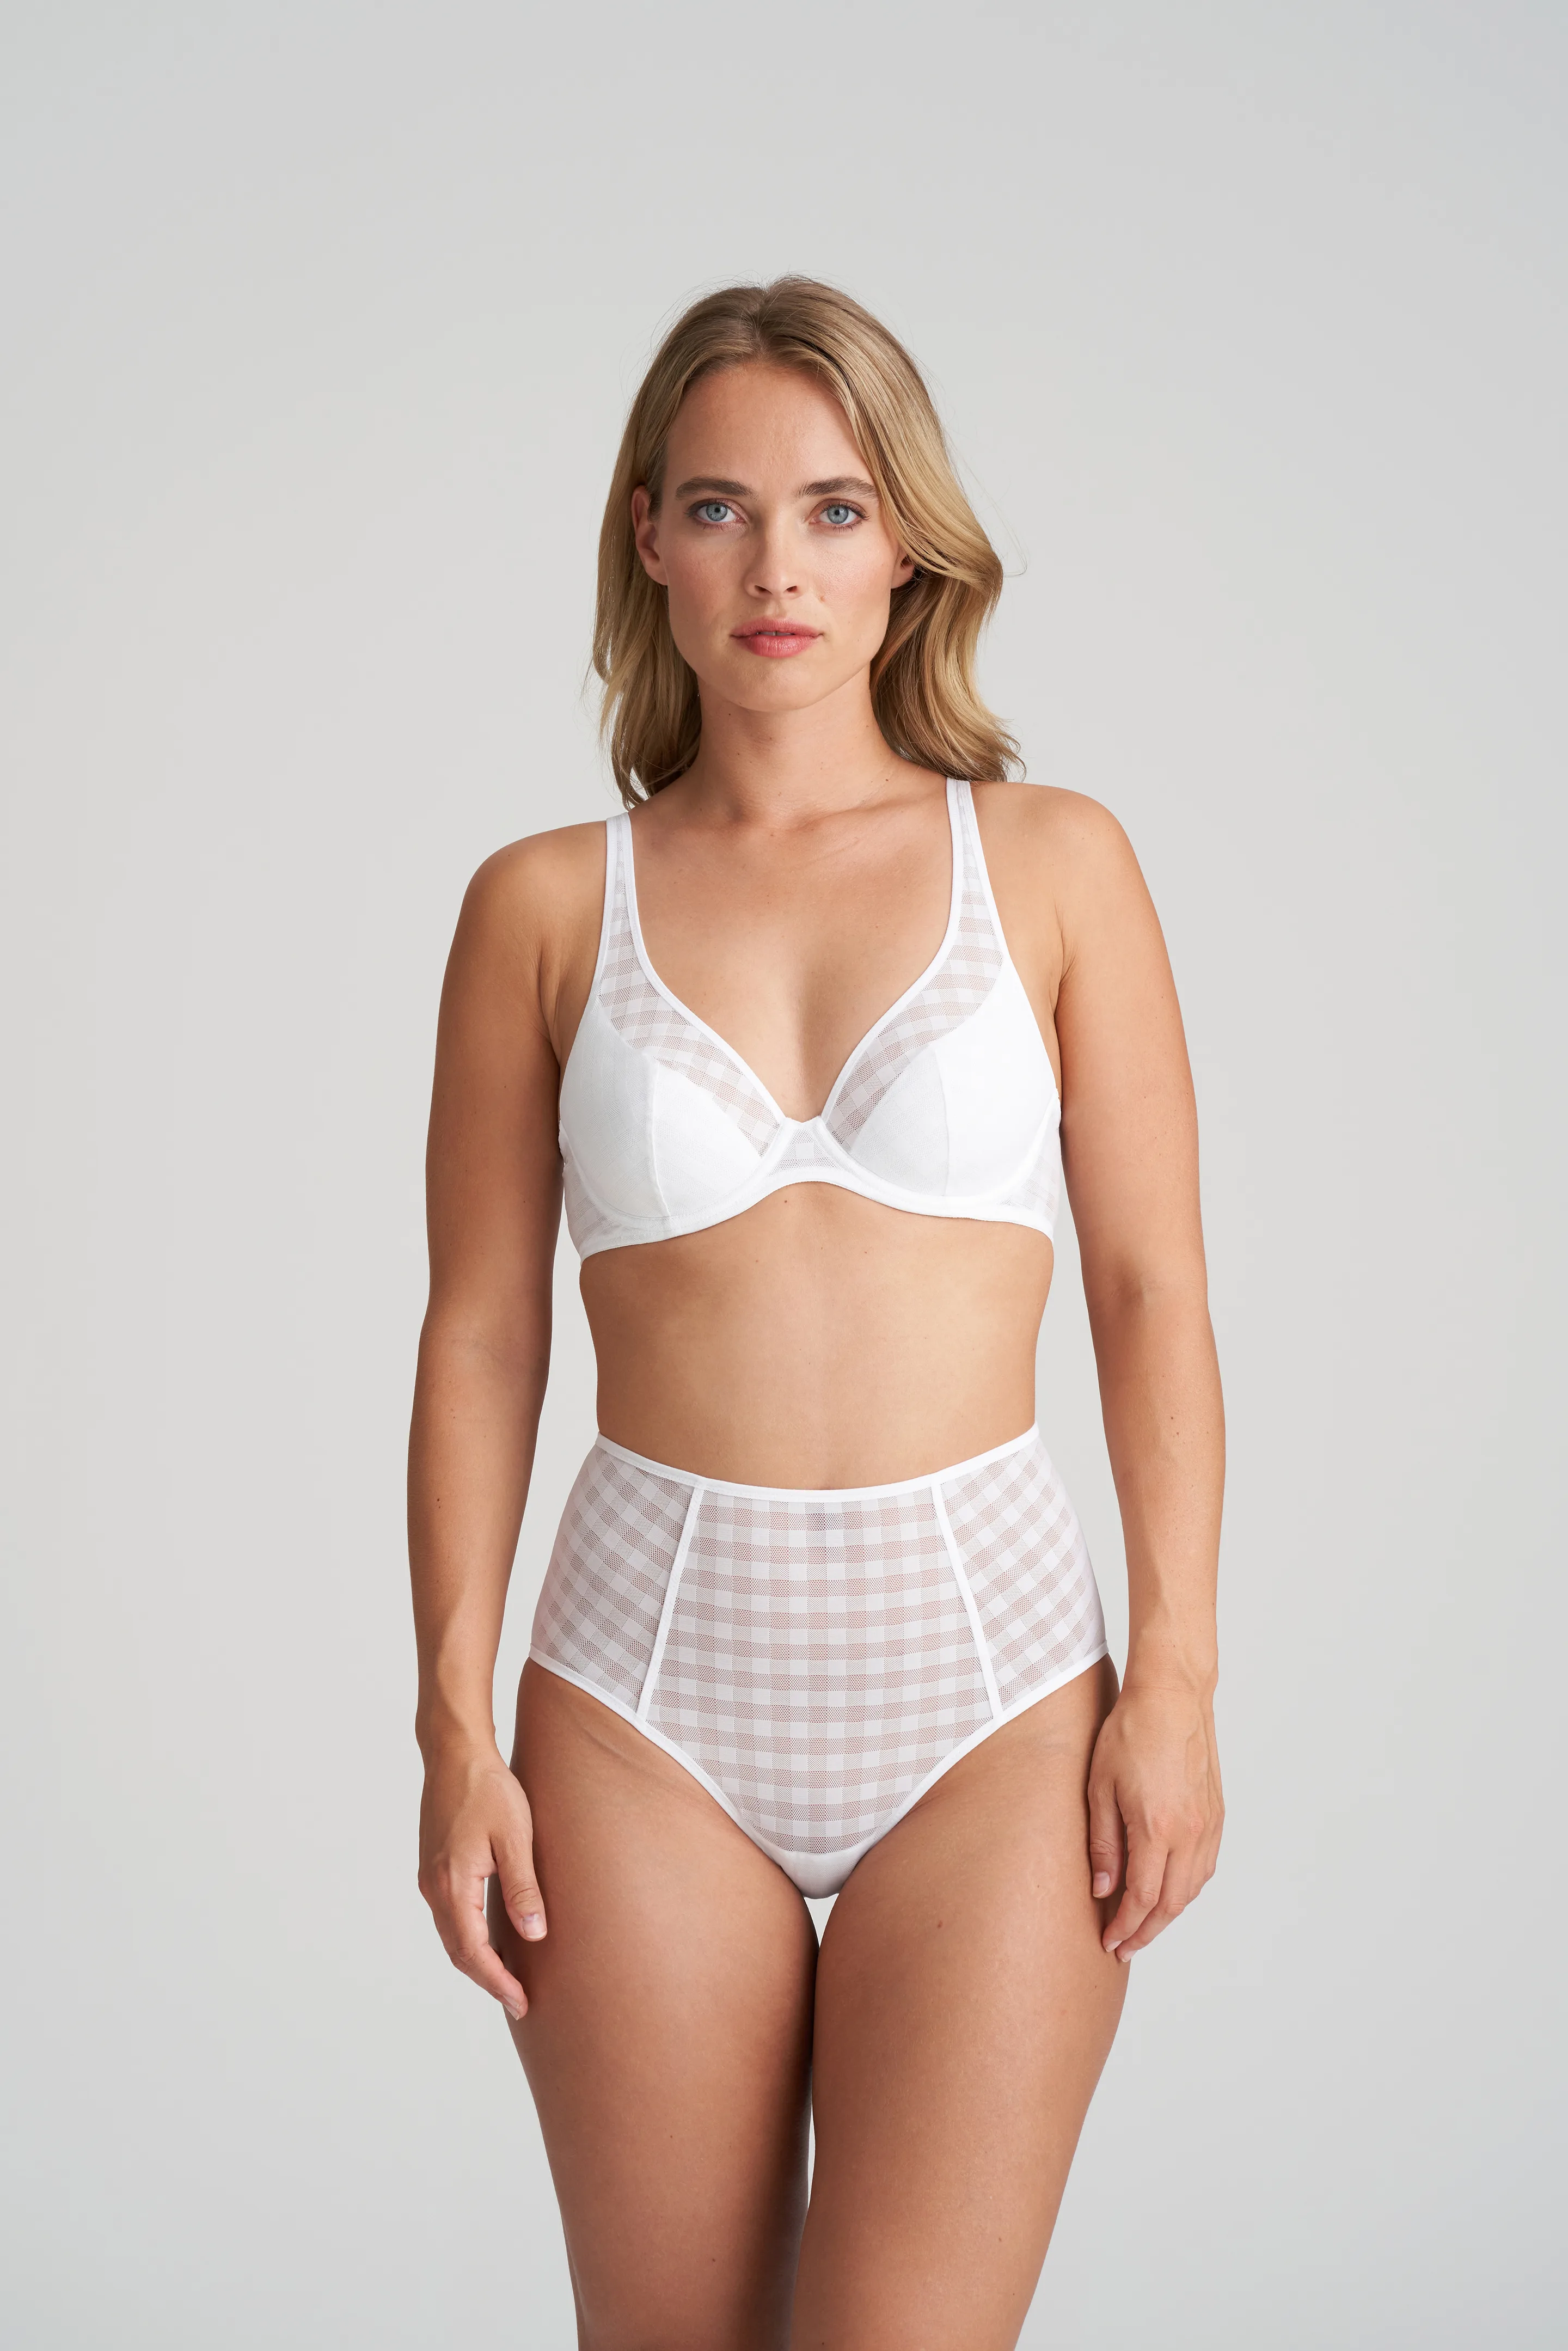 MarieSue Lingerie - Fantasie Illusion your go to bra in four colours white,  nude, black and navy. Buy on line or in store ❤️ Fantasie Illusion €42.00  Illusion is an affordable everyday